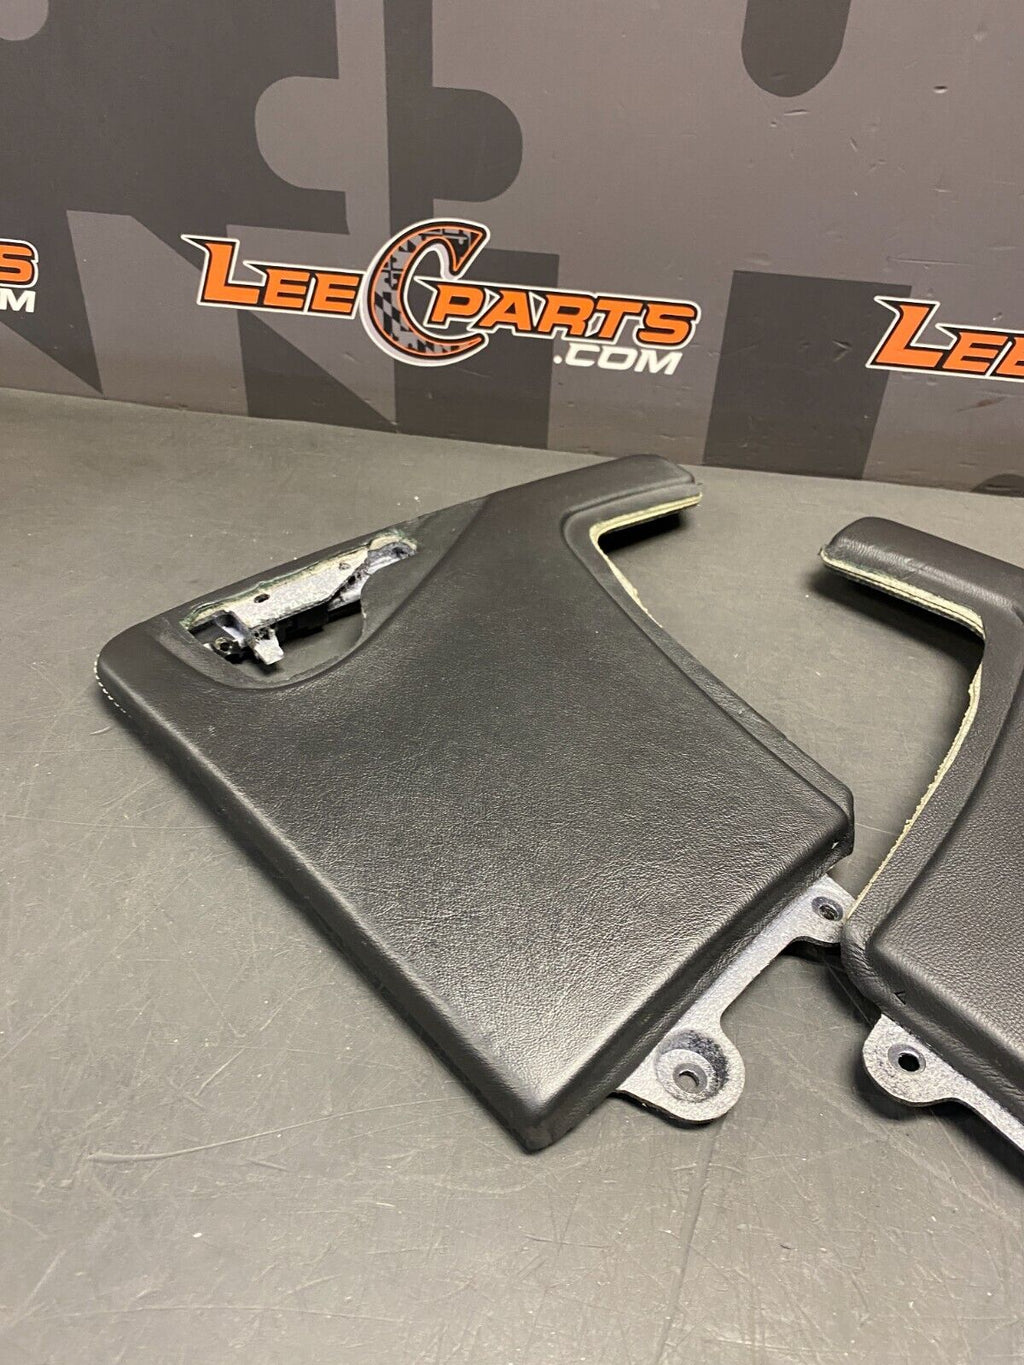 2007 PORSCHE 911 TURBO 997.1 OEM LEATHER KNEE KICK PANELS SIDE CONSOLE PAIR USED